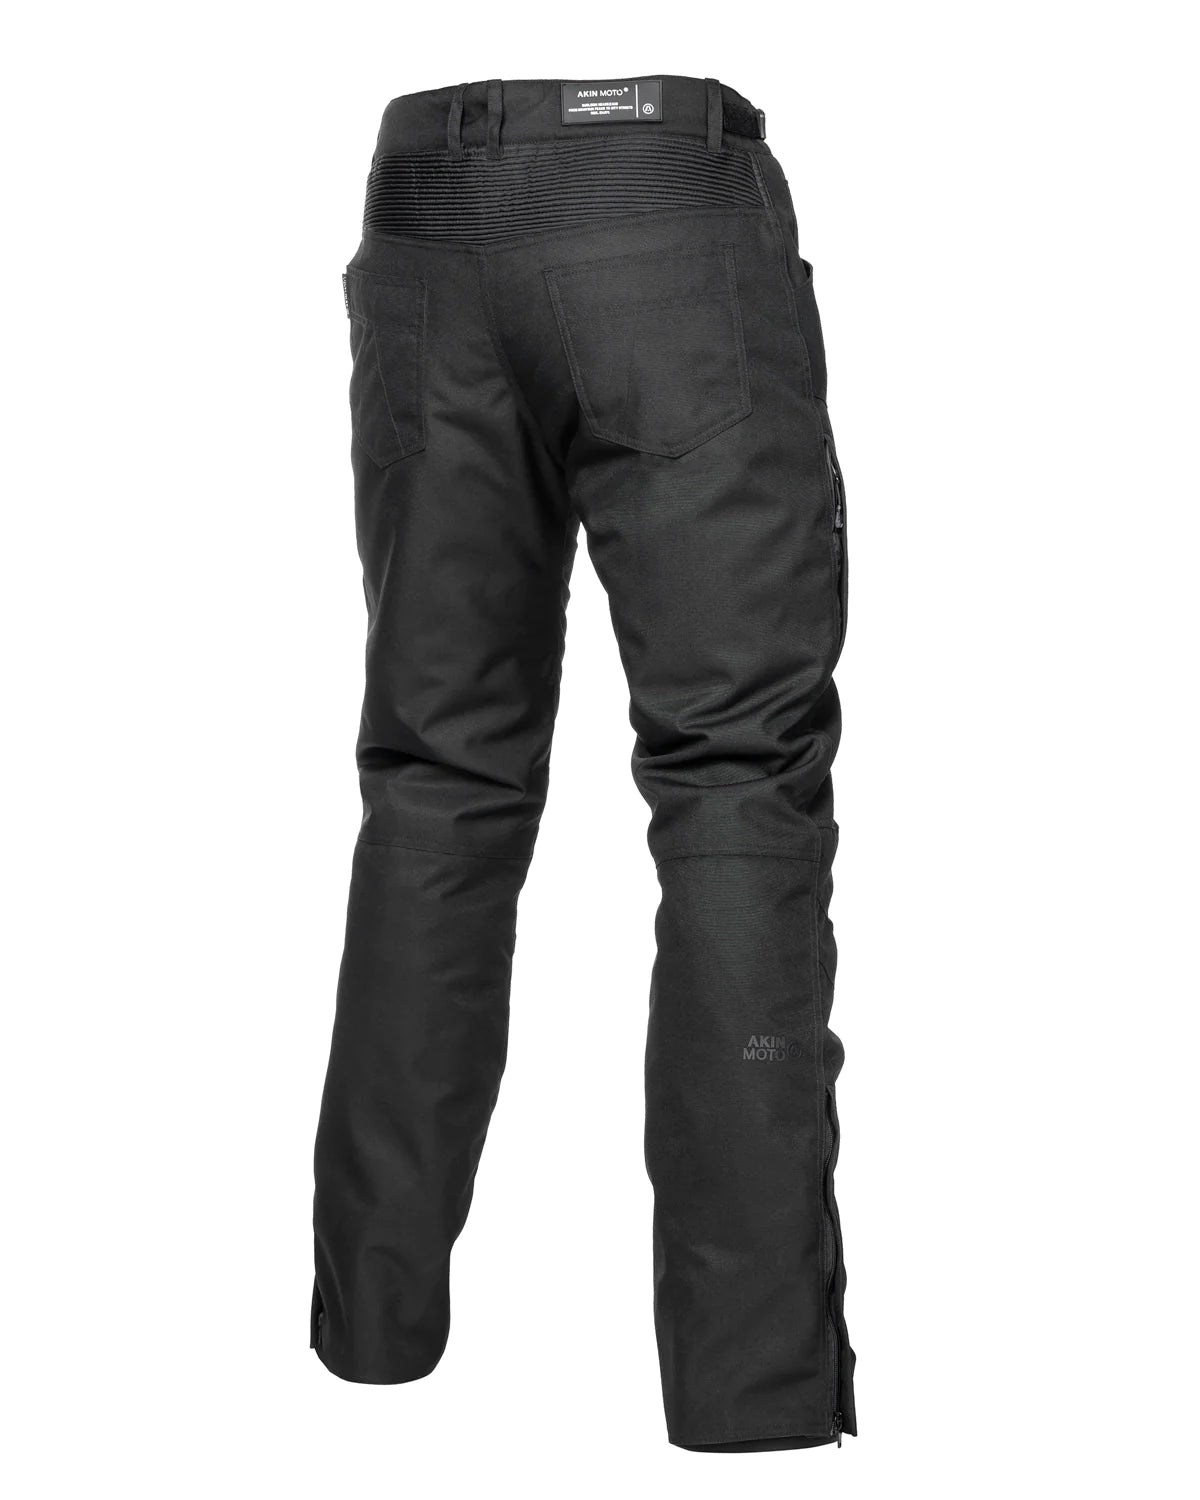 Hi-vis Motorcycle Trousers Motorbike Waterproof Pants With CE Protective  Armour | Bike Wear Direct